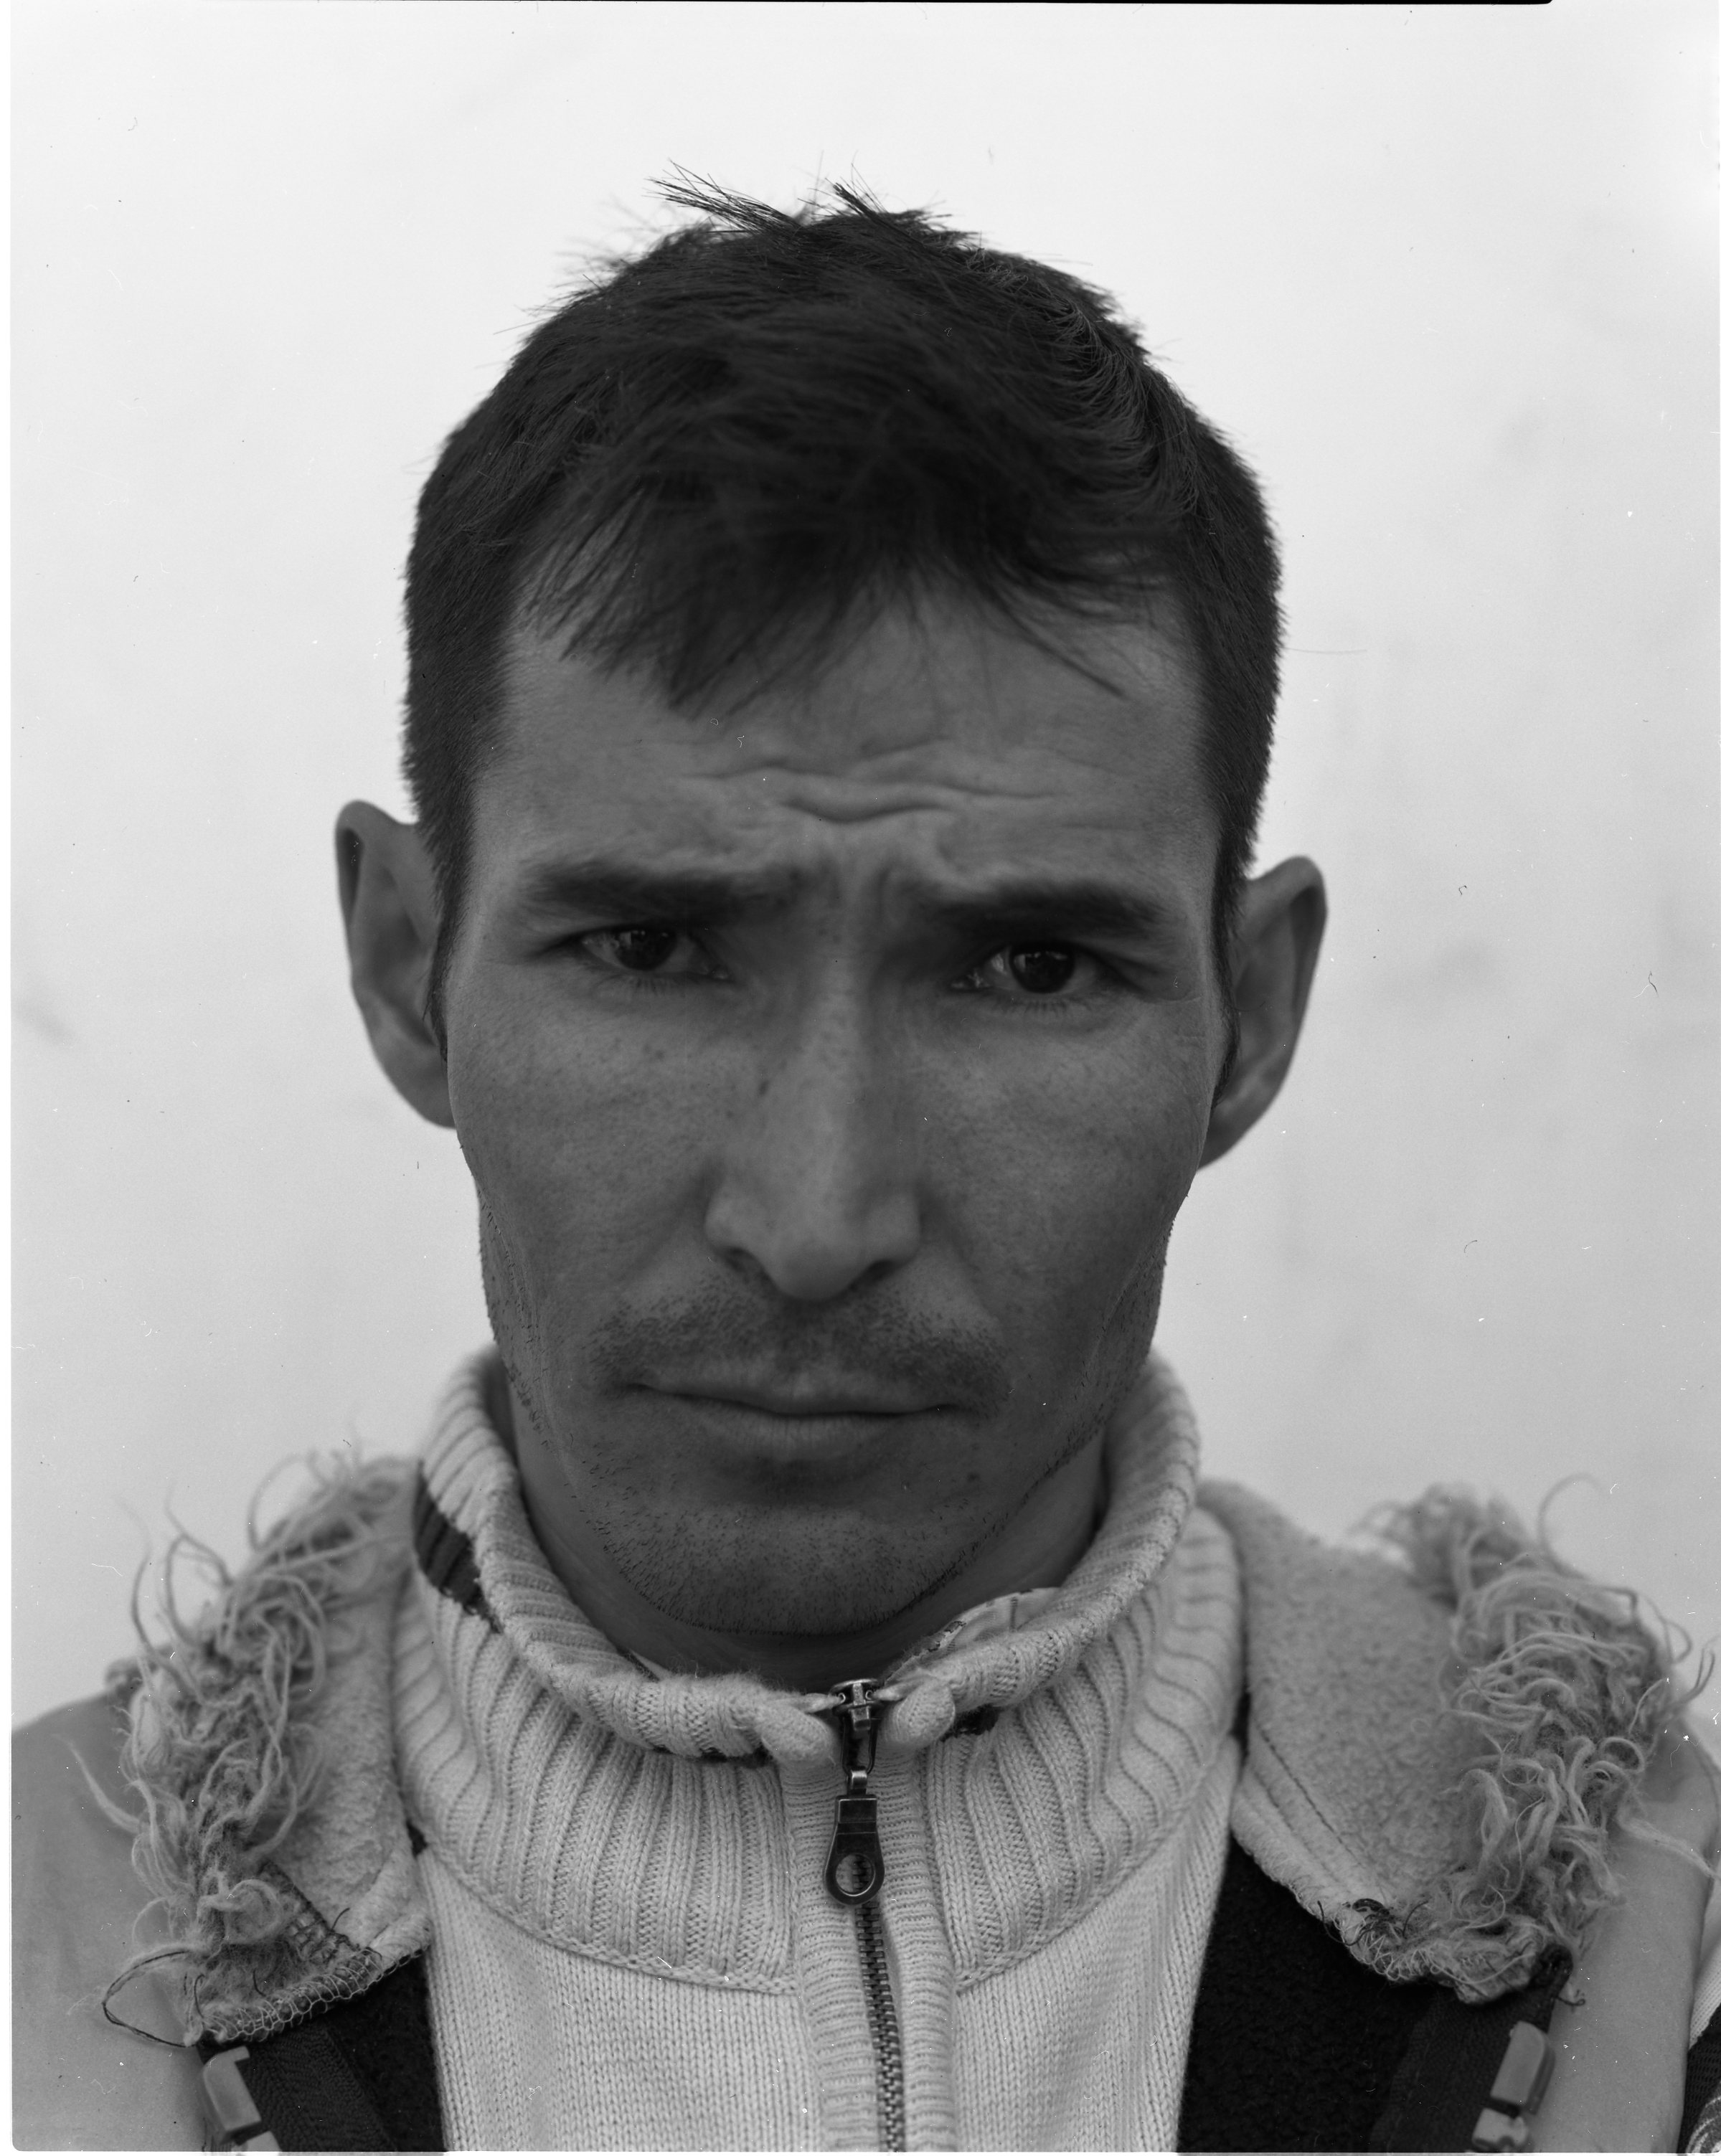  Mohammed Hossein Qalandari, known as “Elvis,” worked as a translator with American forces in Kandahar, Afghanistan, in 2010. Facing threats from the Taliban for his work, he applied for asylum in the U.S., but his application was denied. He traveled